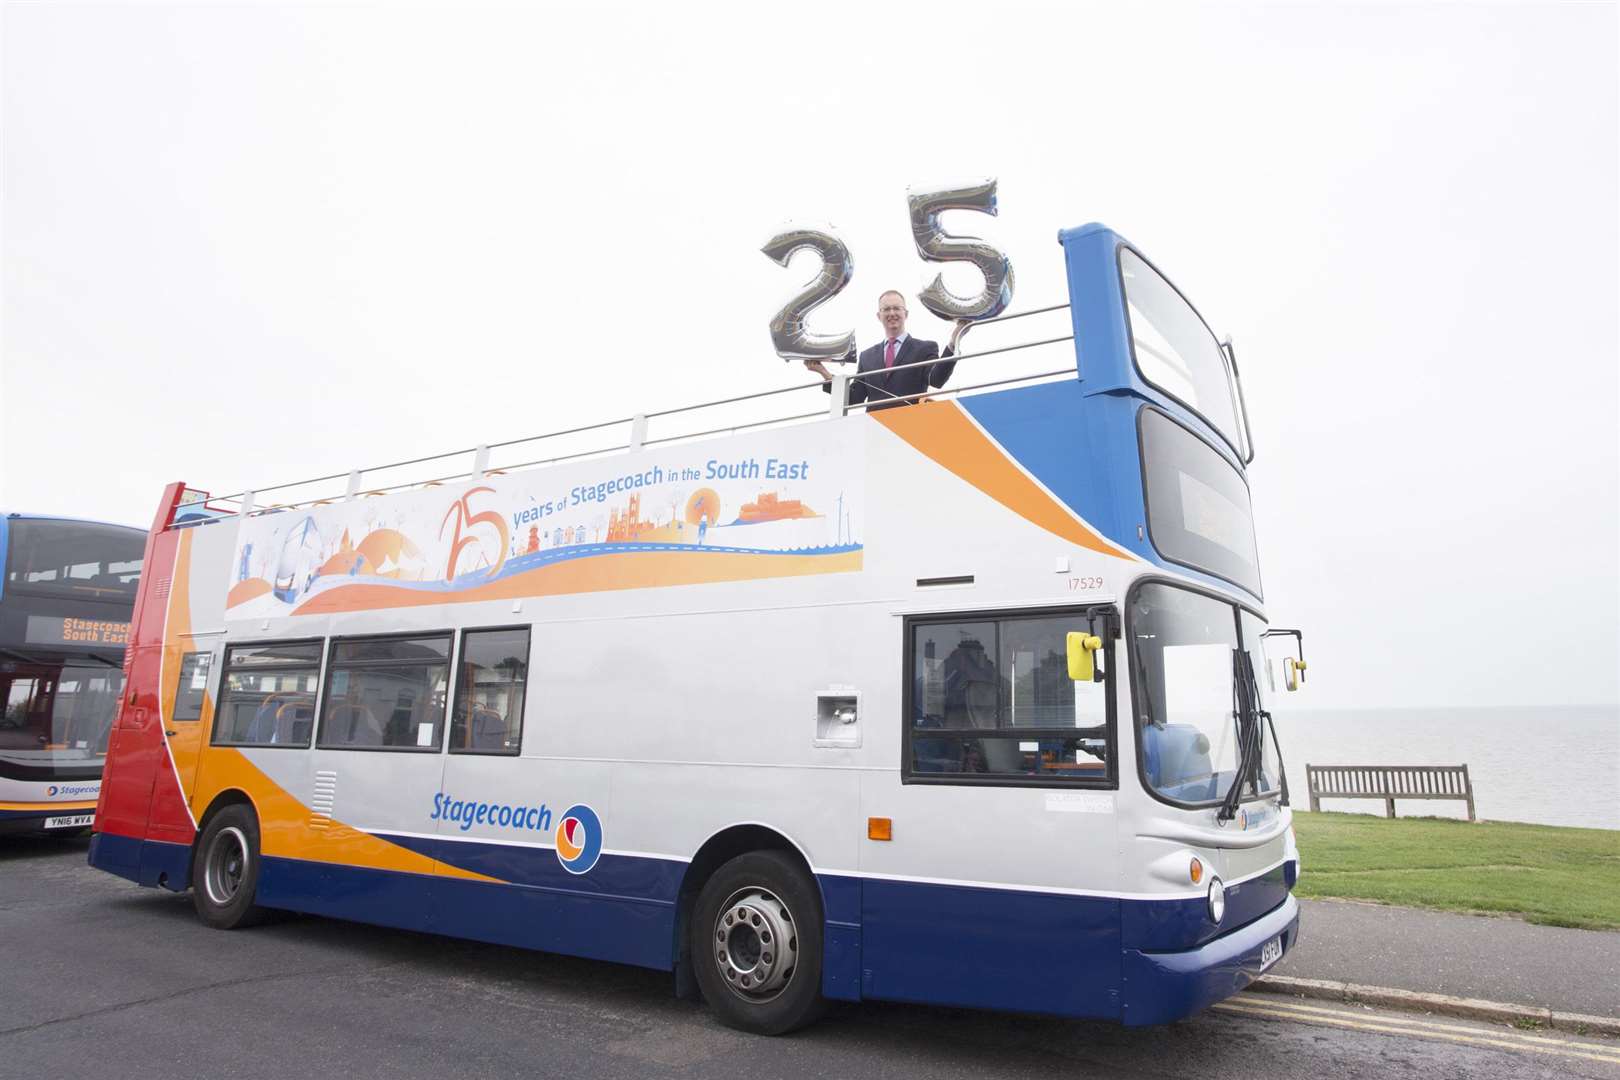 Matthew Arnold, commercial director at Stagecoach South East, celebrating the company’s 25th anniversary with the silver liveried buses (4053561)